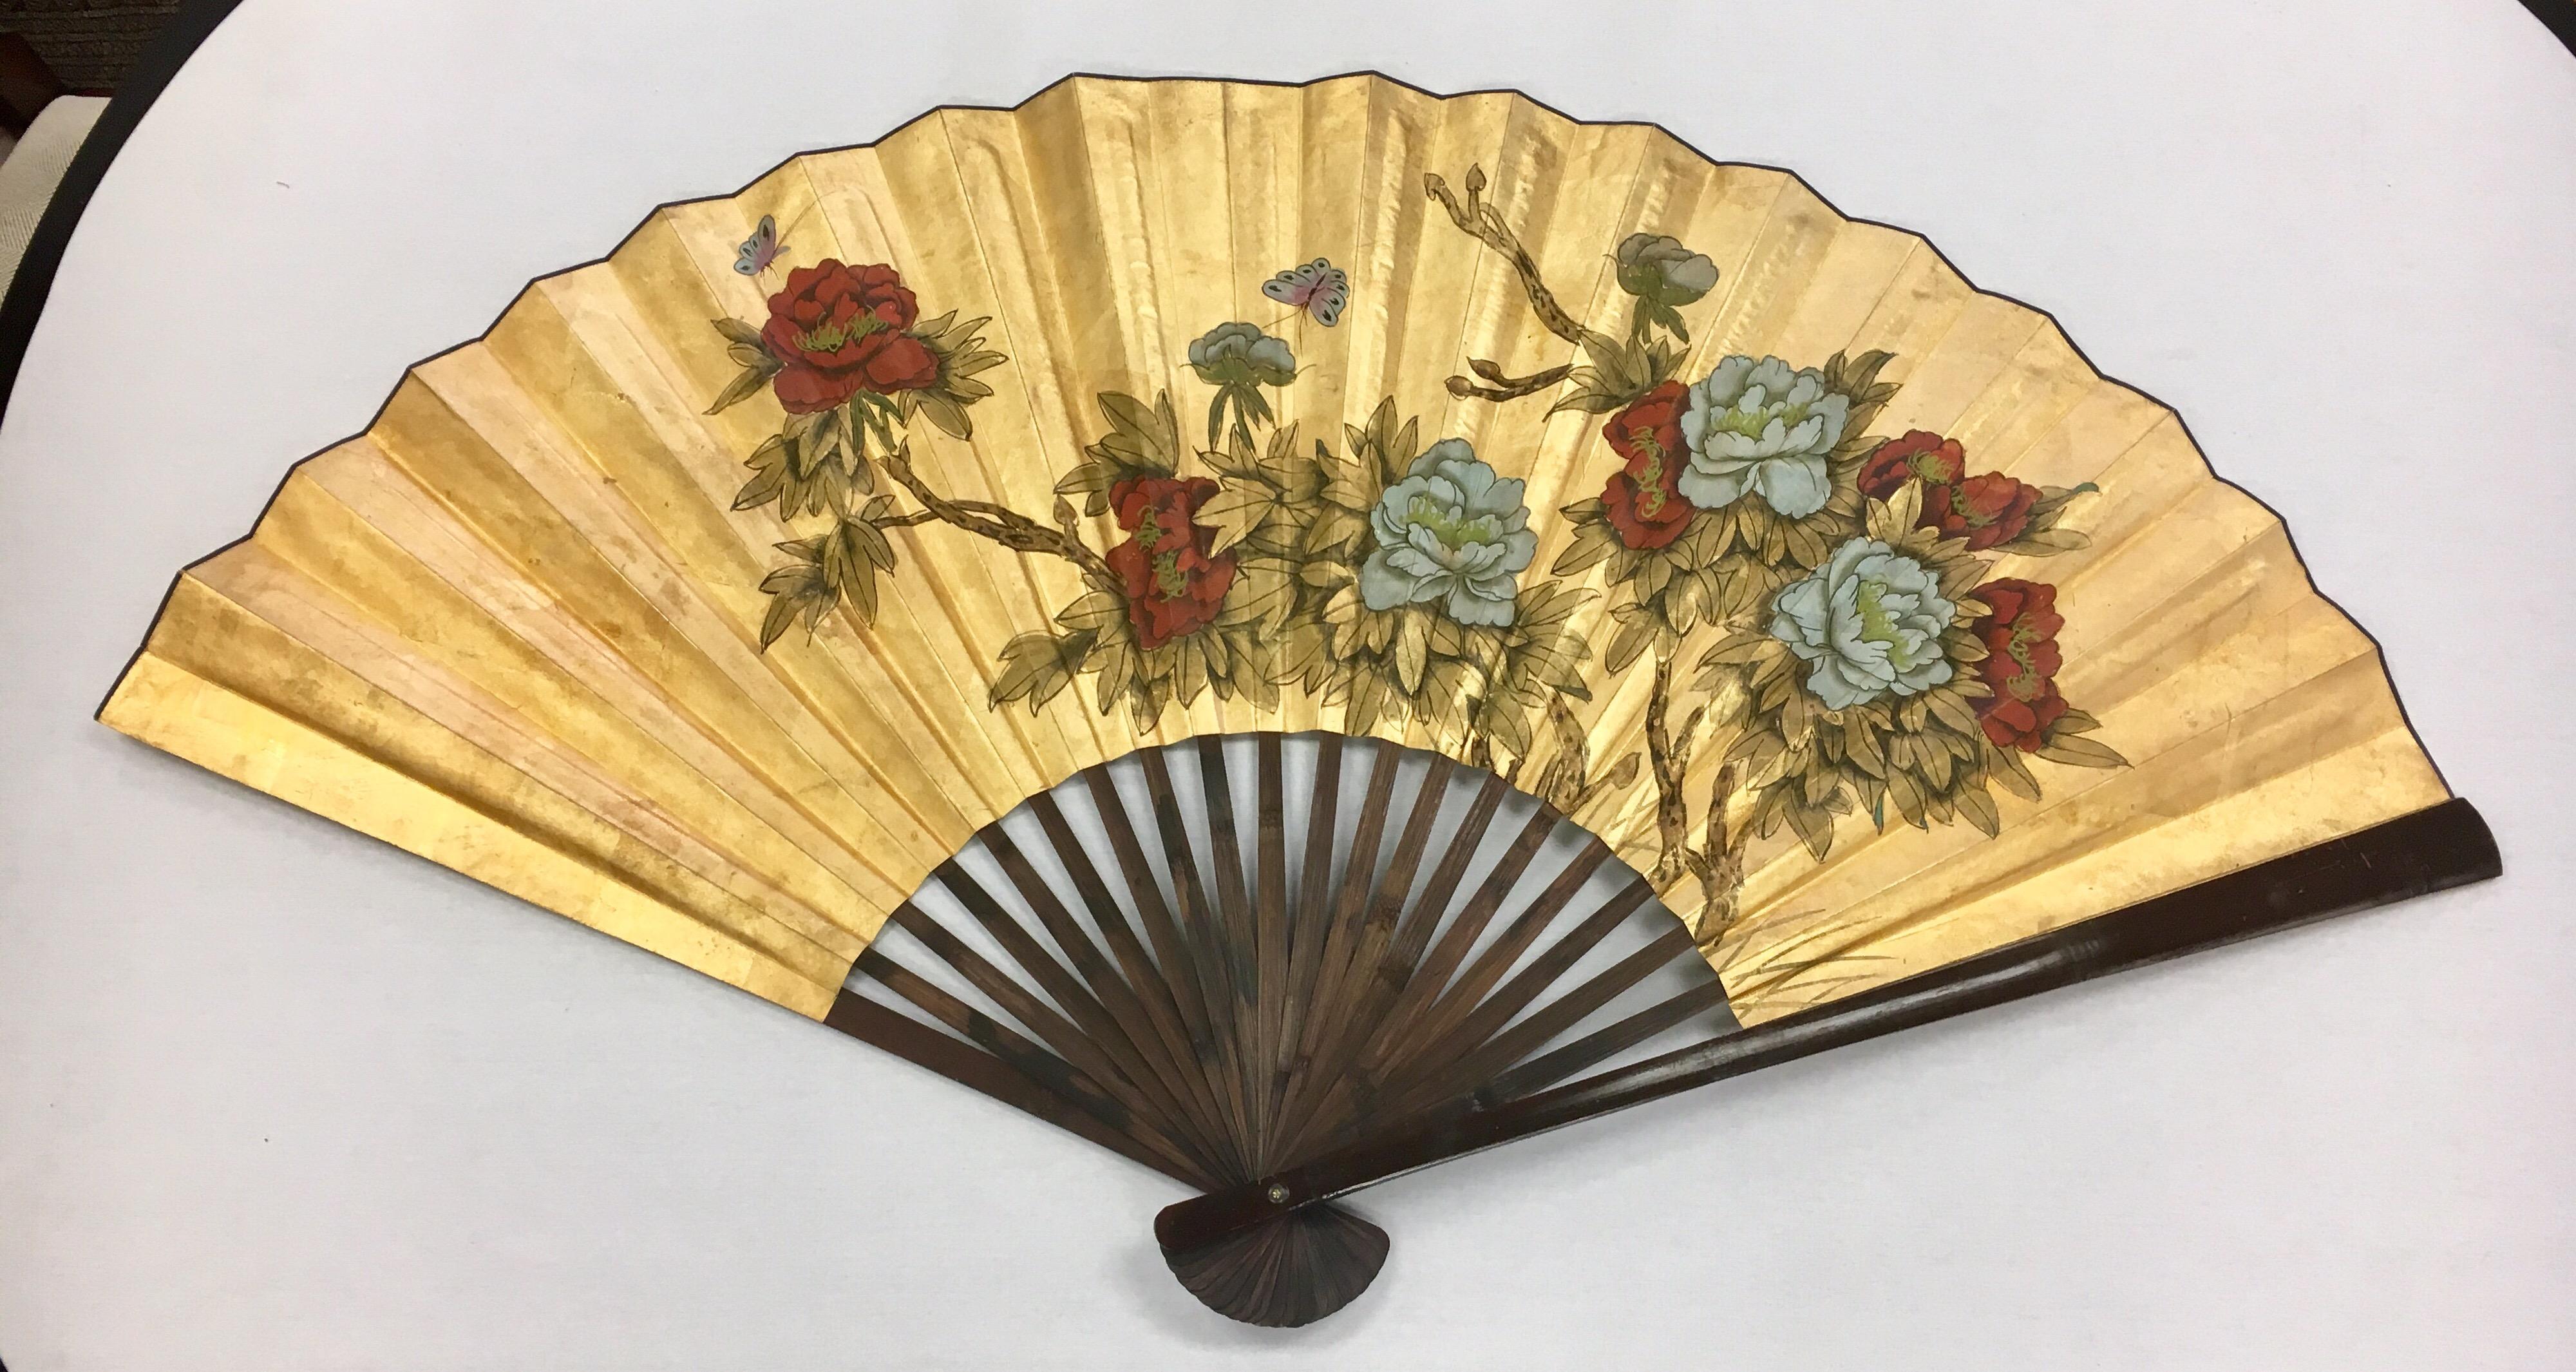 Monumental Chinese folding fan that is extra large when fully opened, circa 1950s
The colors are still incredibly vivid and the folding mechanism works perfectly.
Comes ready to hang on any wall with two hooks in back.